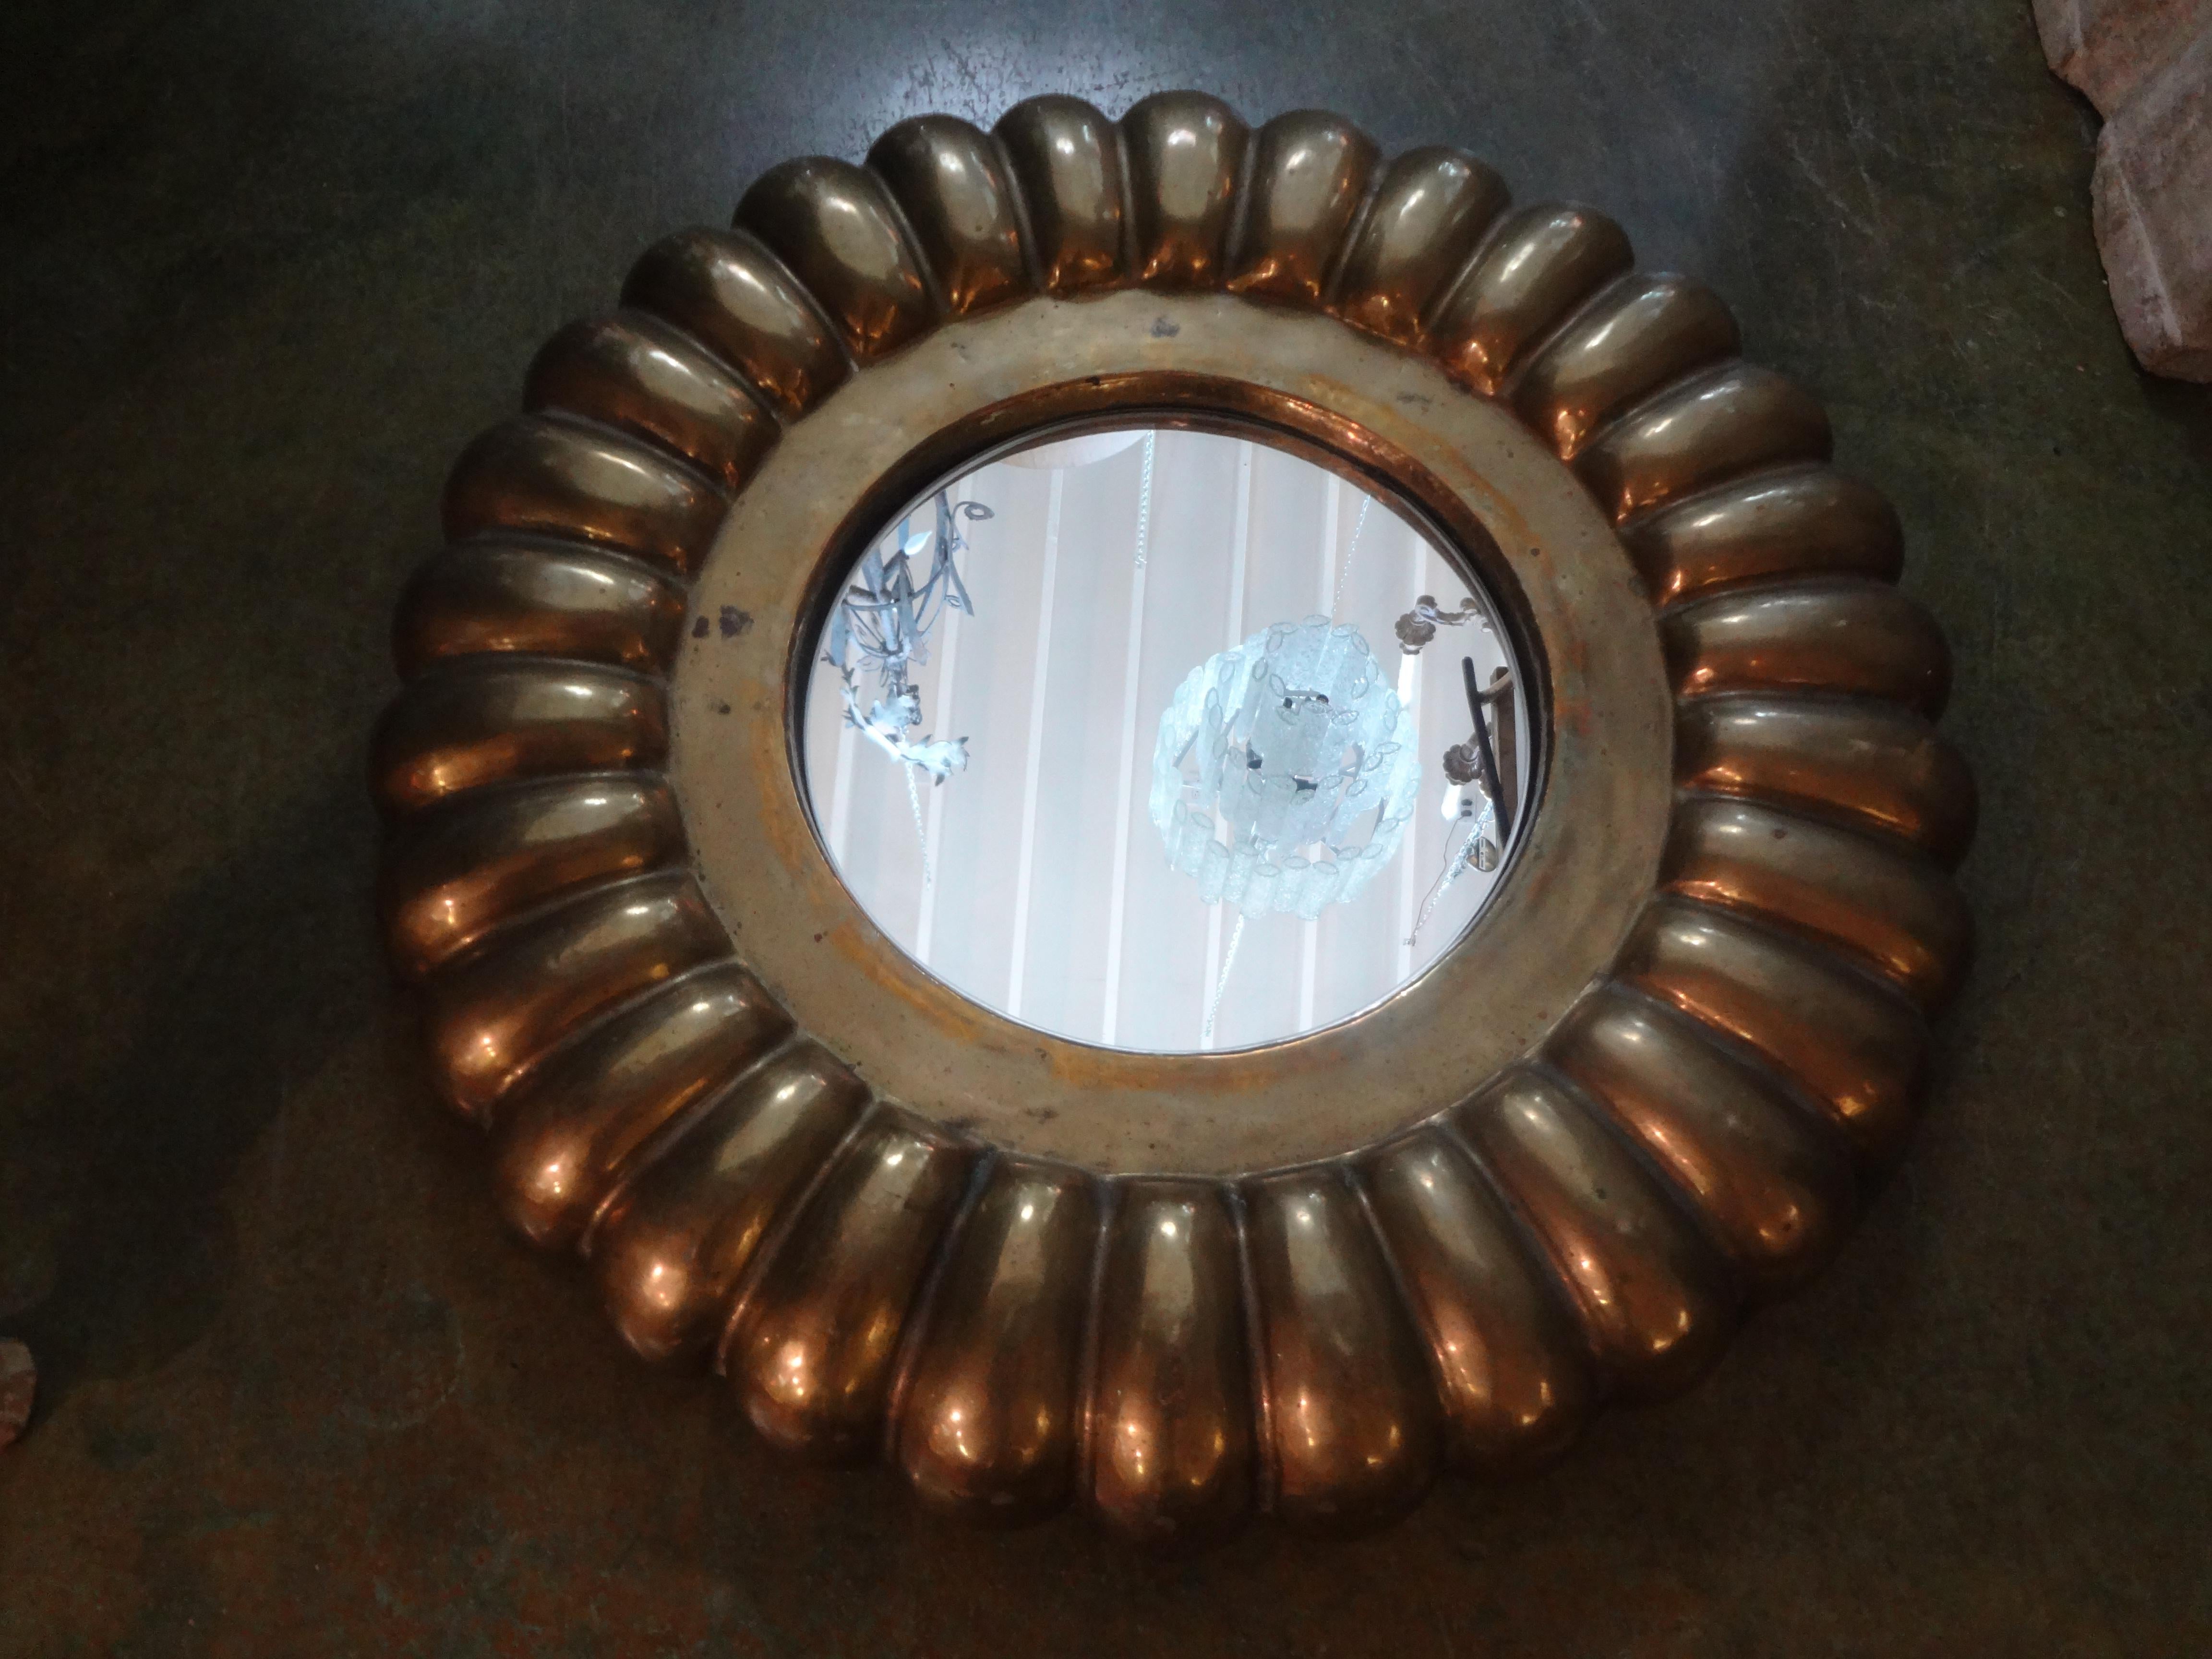 Stunning vintage Italian round brass mirror. This great Gio Ponti inspired Italian brass mirror has a beautiful scalloped design and a gorgeous warm patina. Perfect for a powder room or grouped with other mirrors.